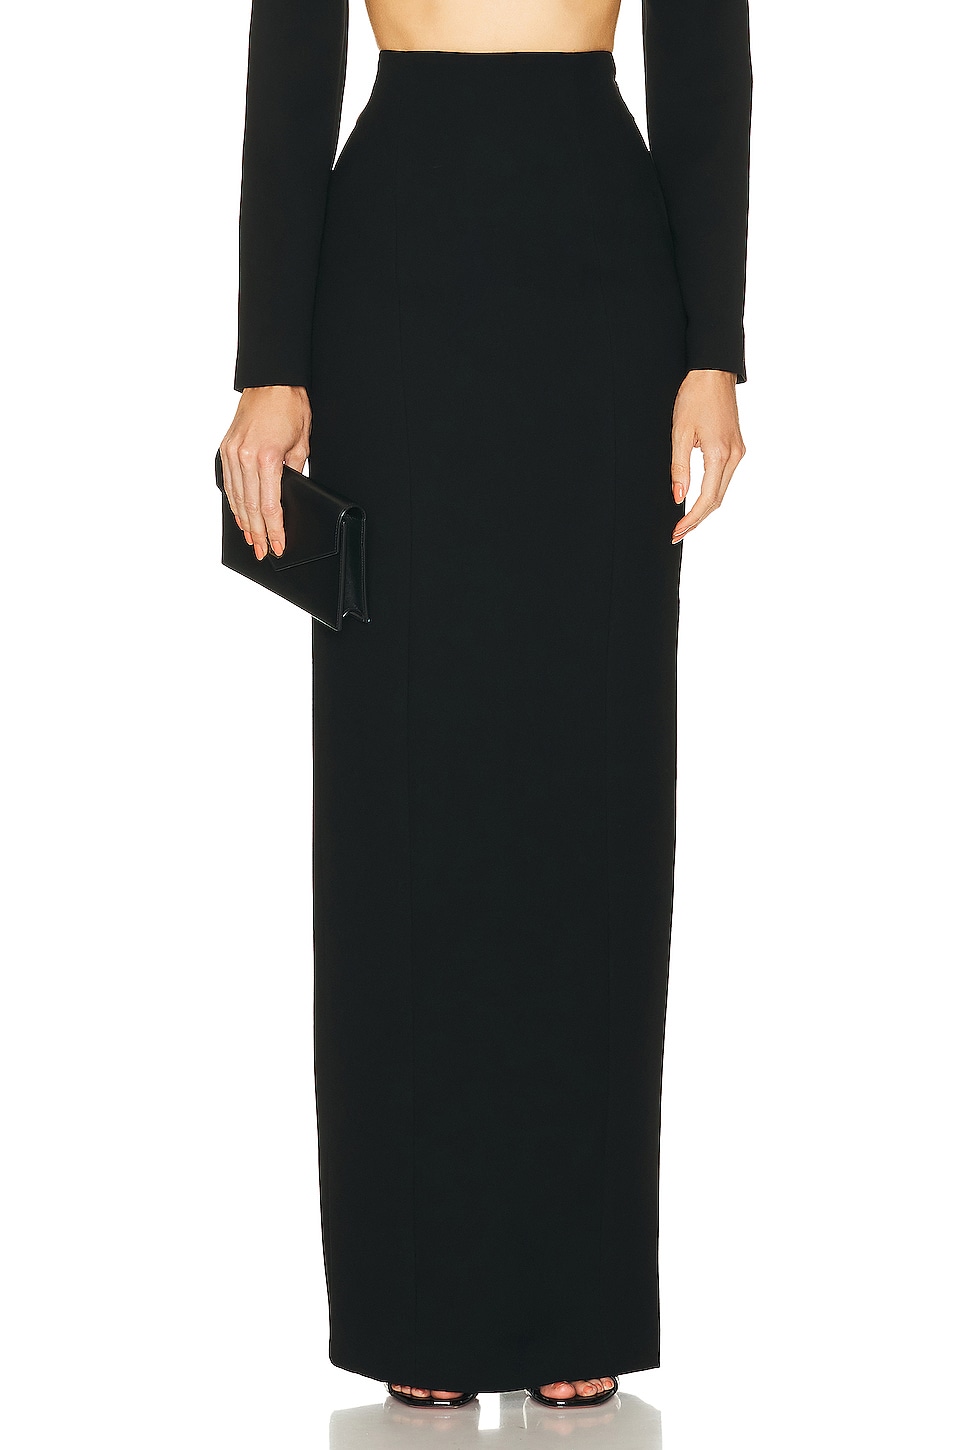 Image 1 of MONOT Back Cutout Pencil Skirt in Black